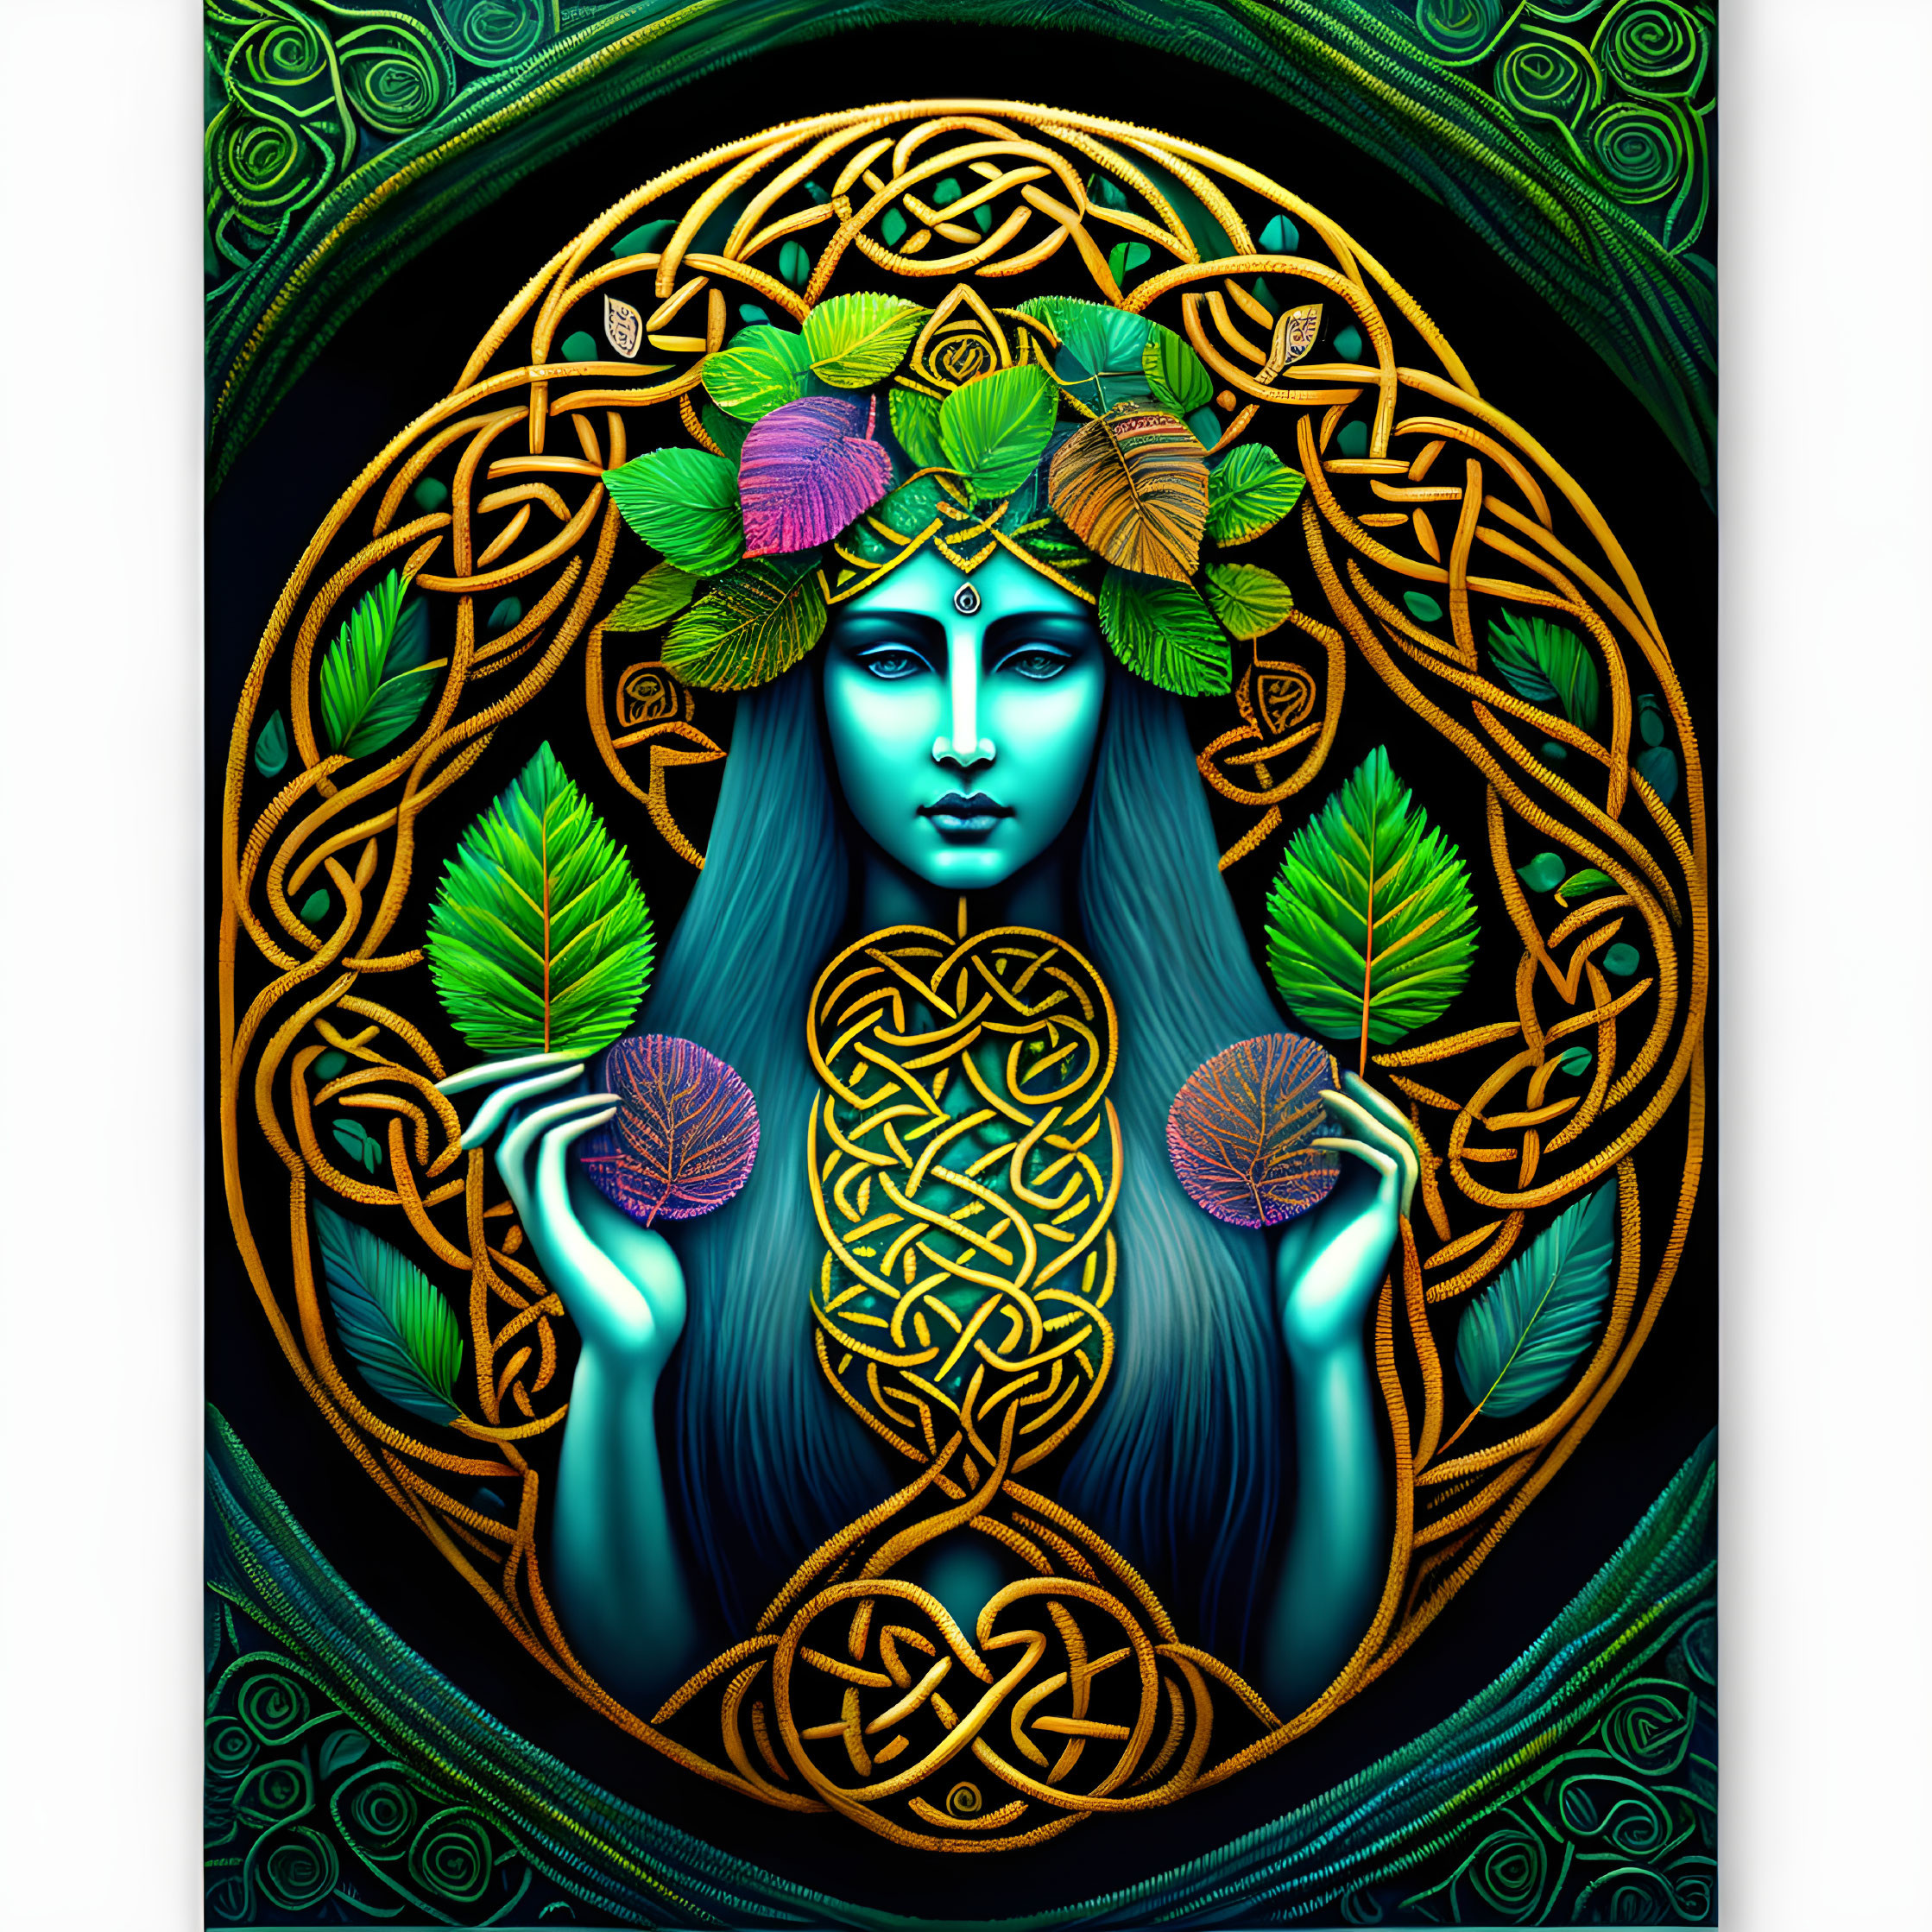 Blue-skinned mystical female figure with Celtic knots and green motifs in circular border